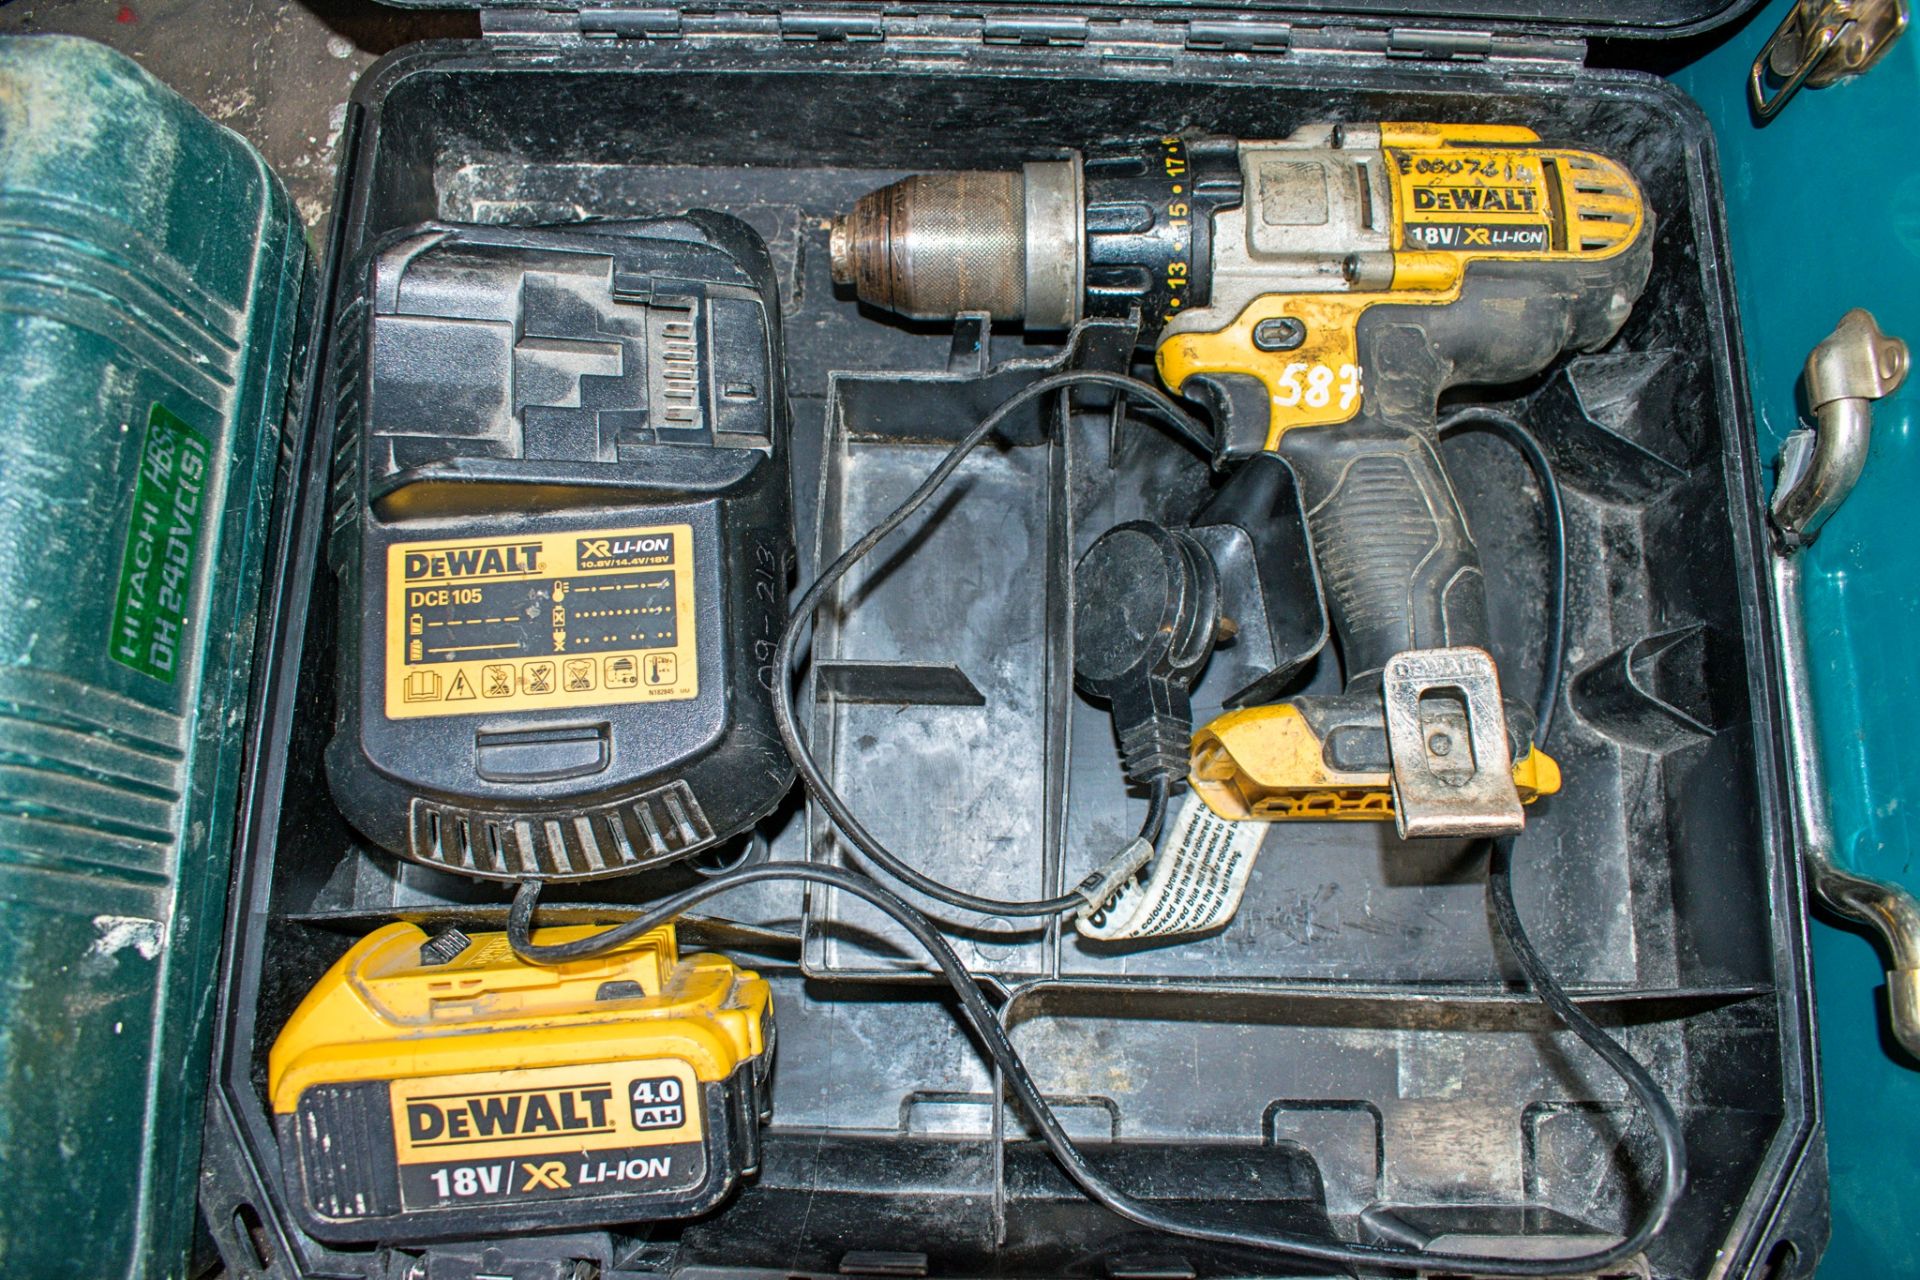 Dewalt 18v cordless drill c/w charger, battery & carry case E0007614